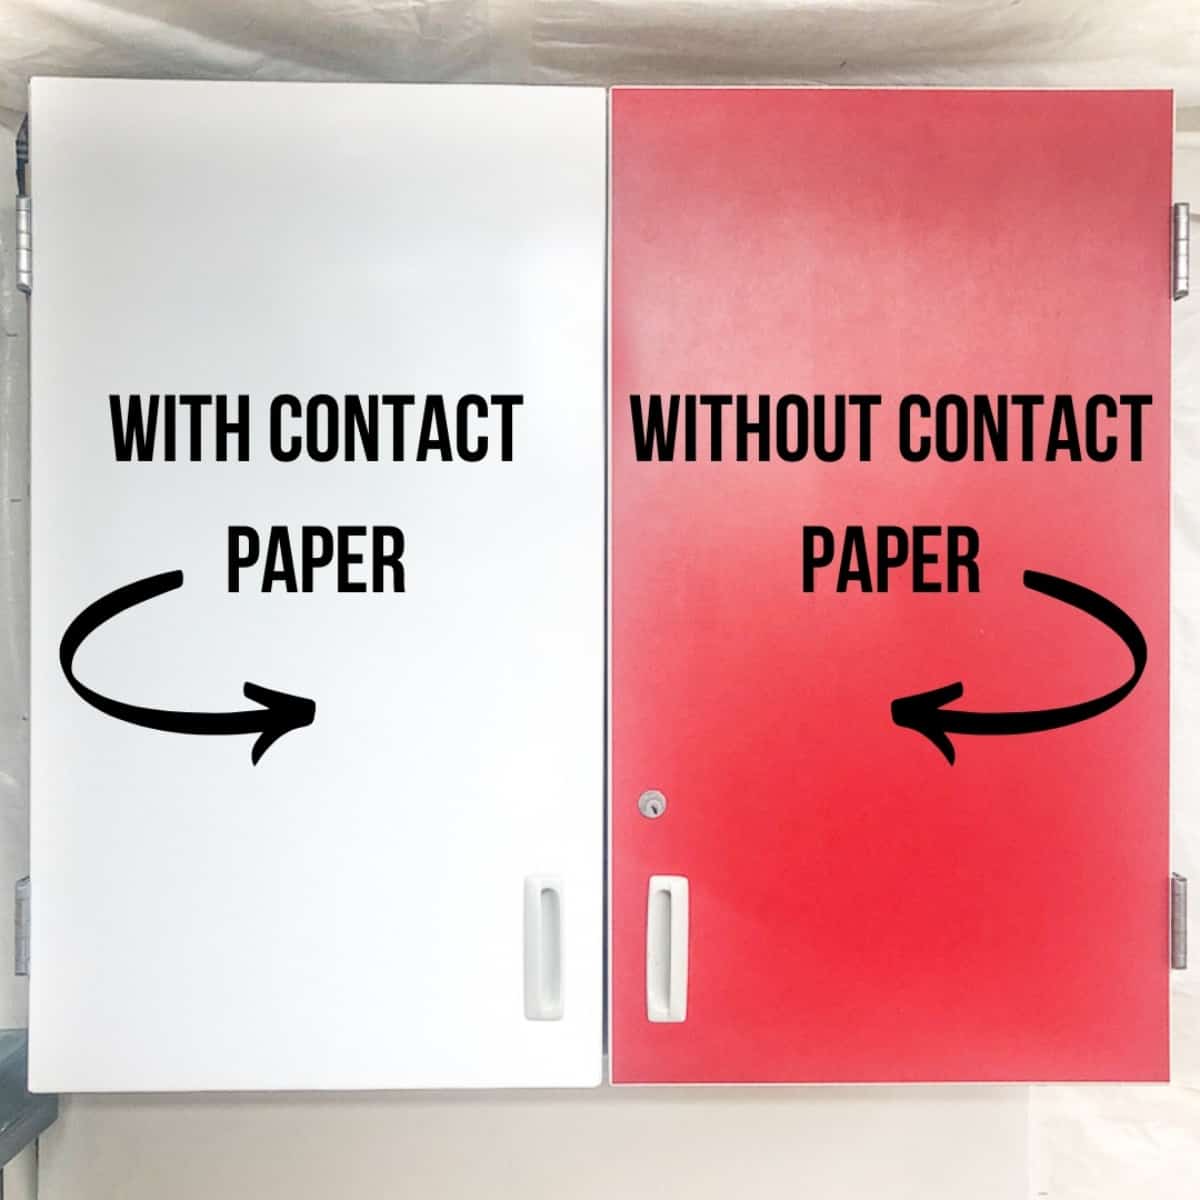 How to Update Cabinets with Contact Paper - The Handyman's Daughter